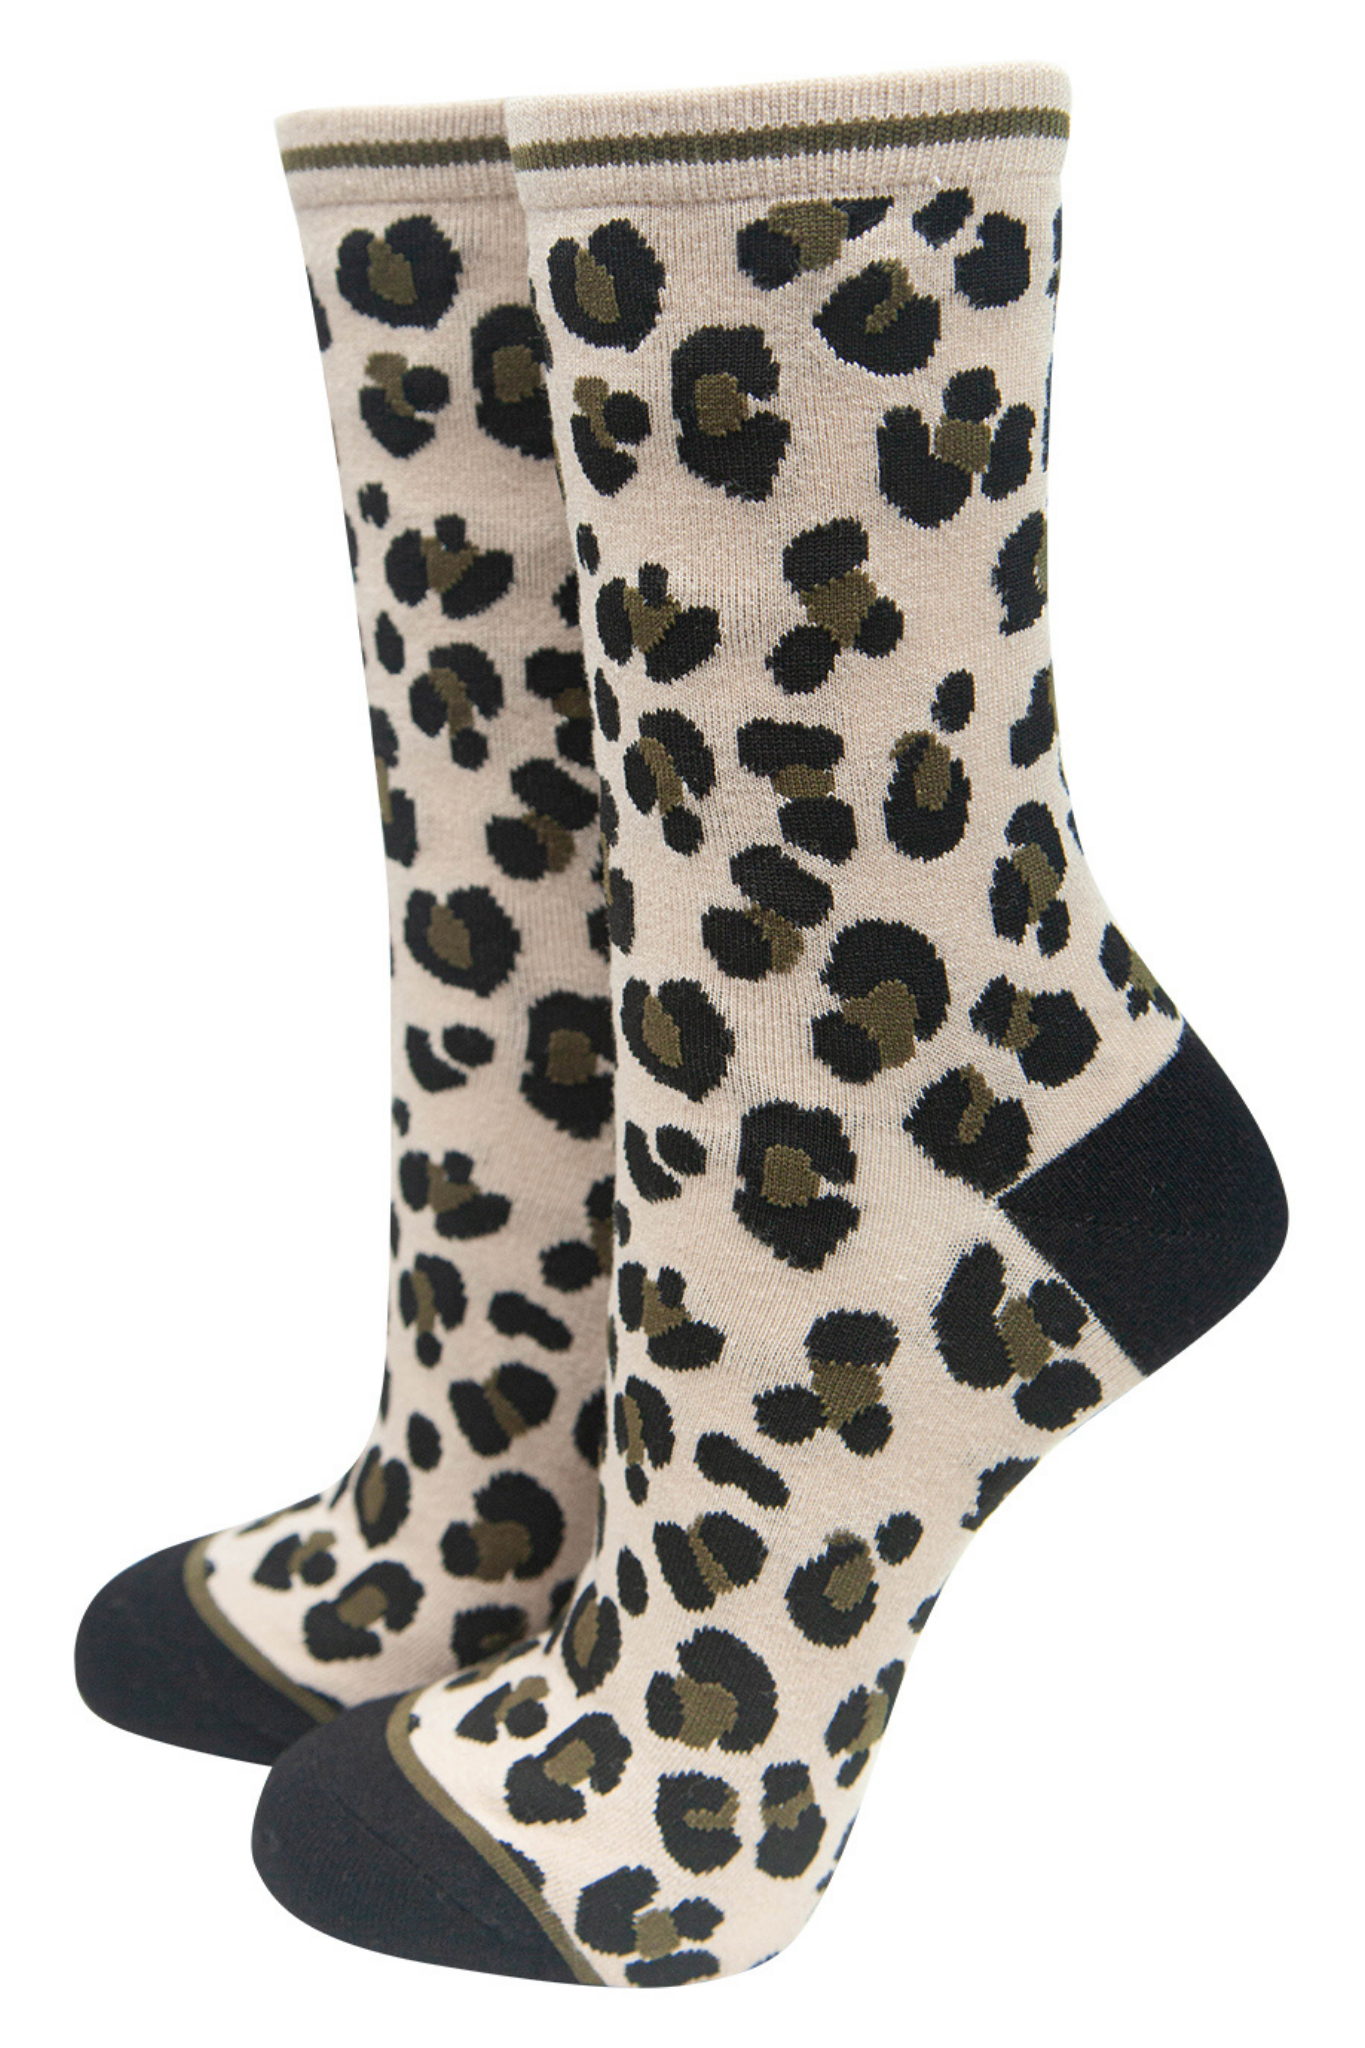 cream bamboo socks with an all over black and brown leoaprd print